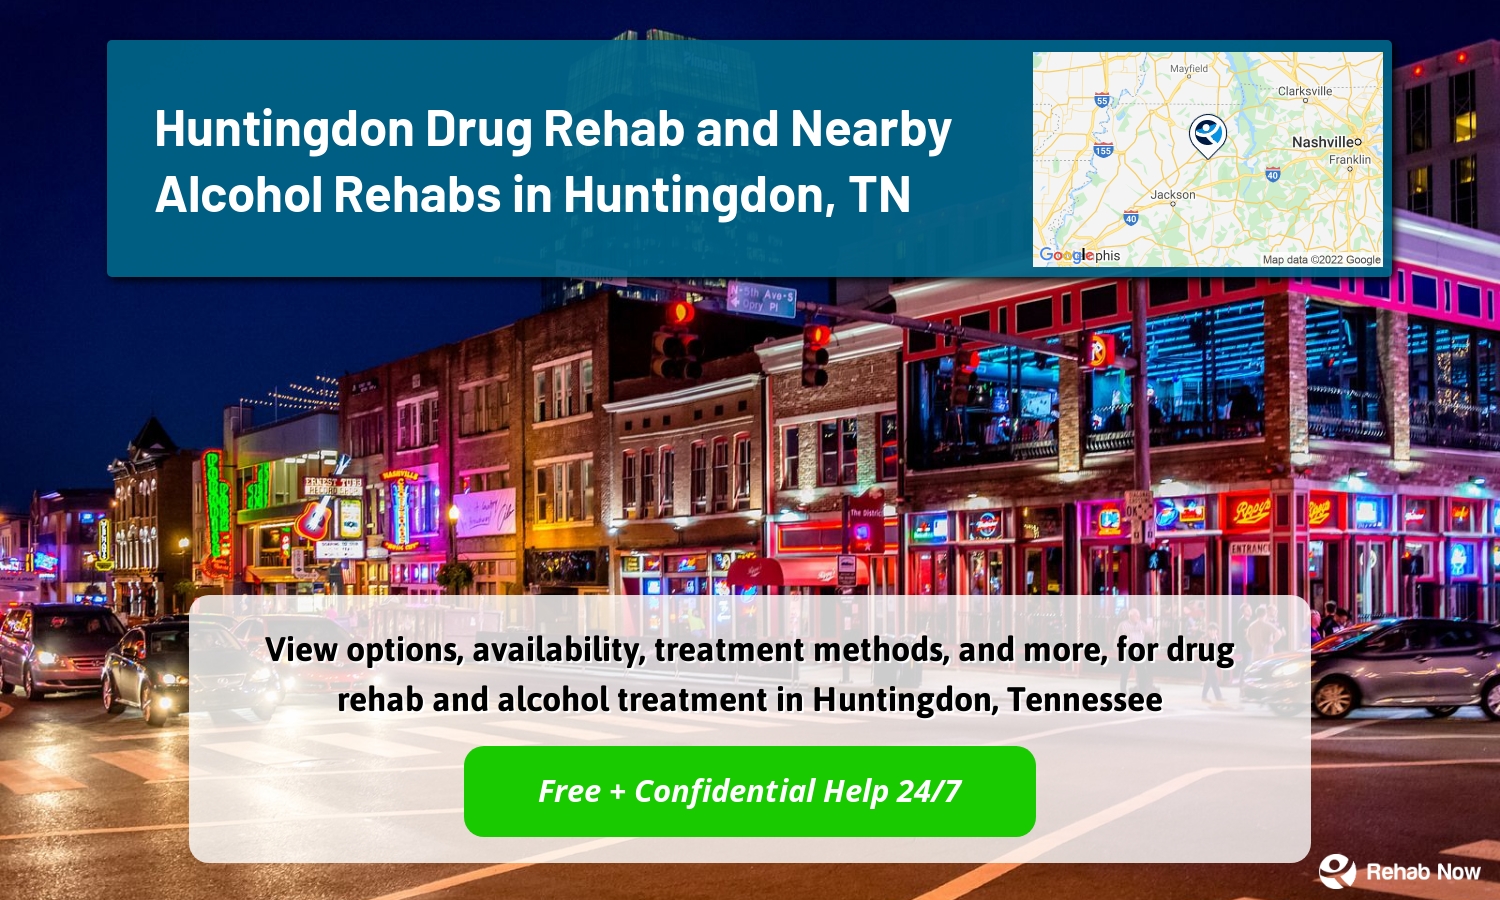 View options, availability, treatment methods, and more, for drug rehab and alcohol treatment in Huntingdon, Tennessee